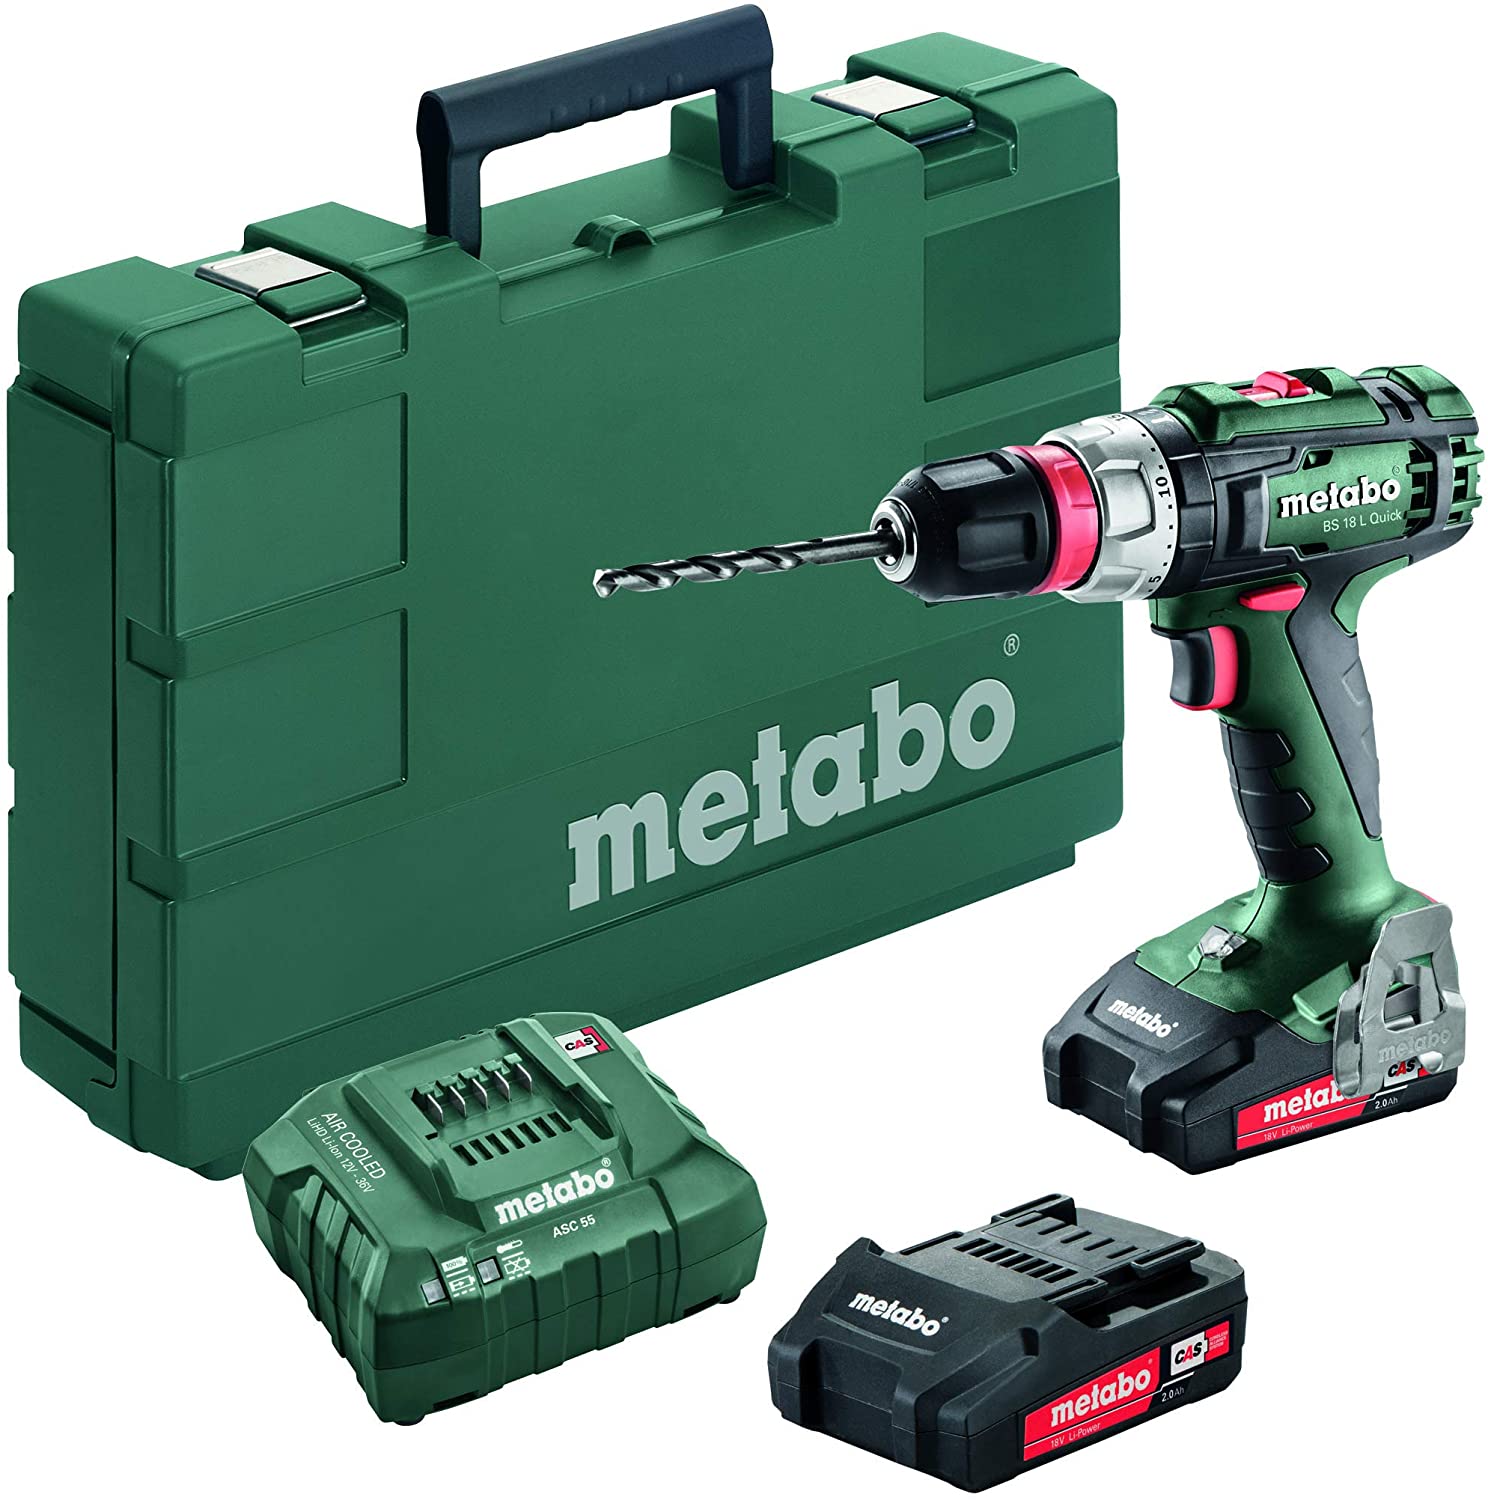 Metabo Drills Category